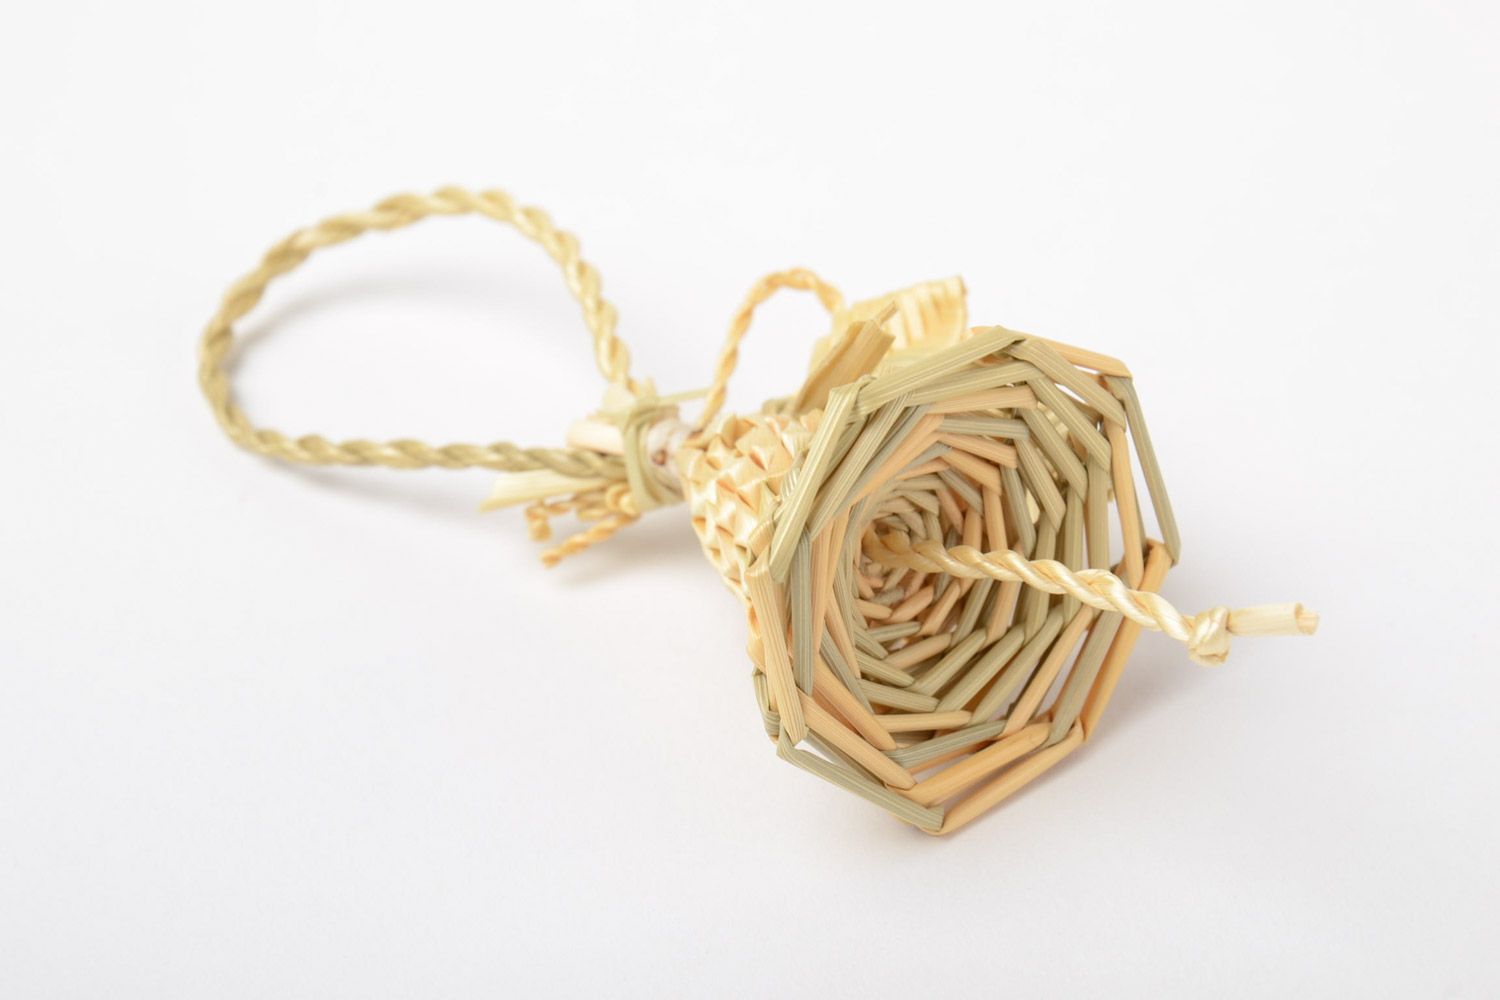 Handmade decorative wall hanging woven of straw in the shape of small bell photo 3